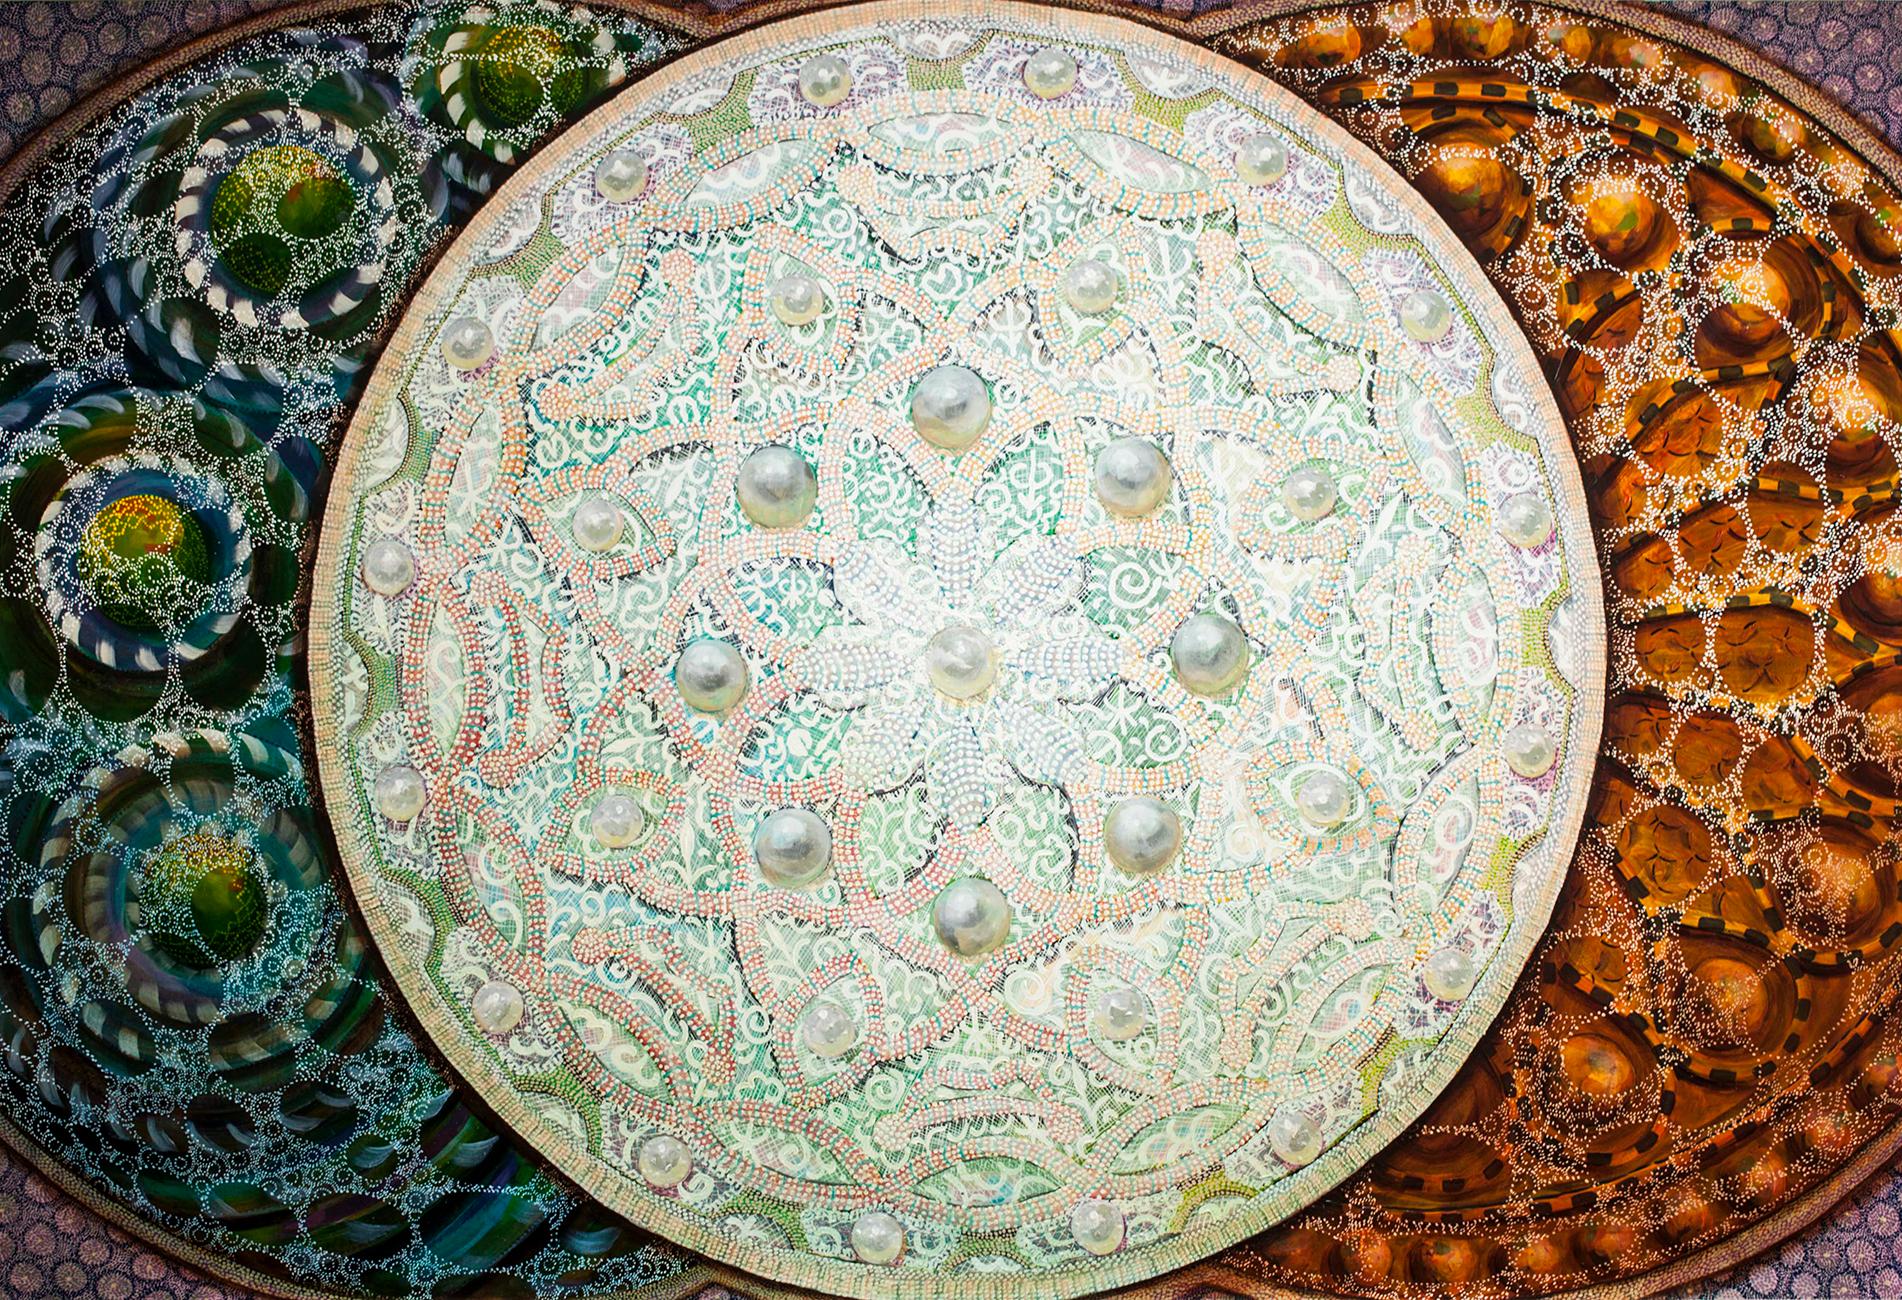 "Many Chambers" is one of a limited edition of 30 prints of an original oil painting by Amy Cheng, and it is part of a Mandala series the artist created in the 2010's. Sumptuous, intricate, ornamented, these oil prints are richly referential. They